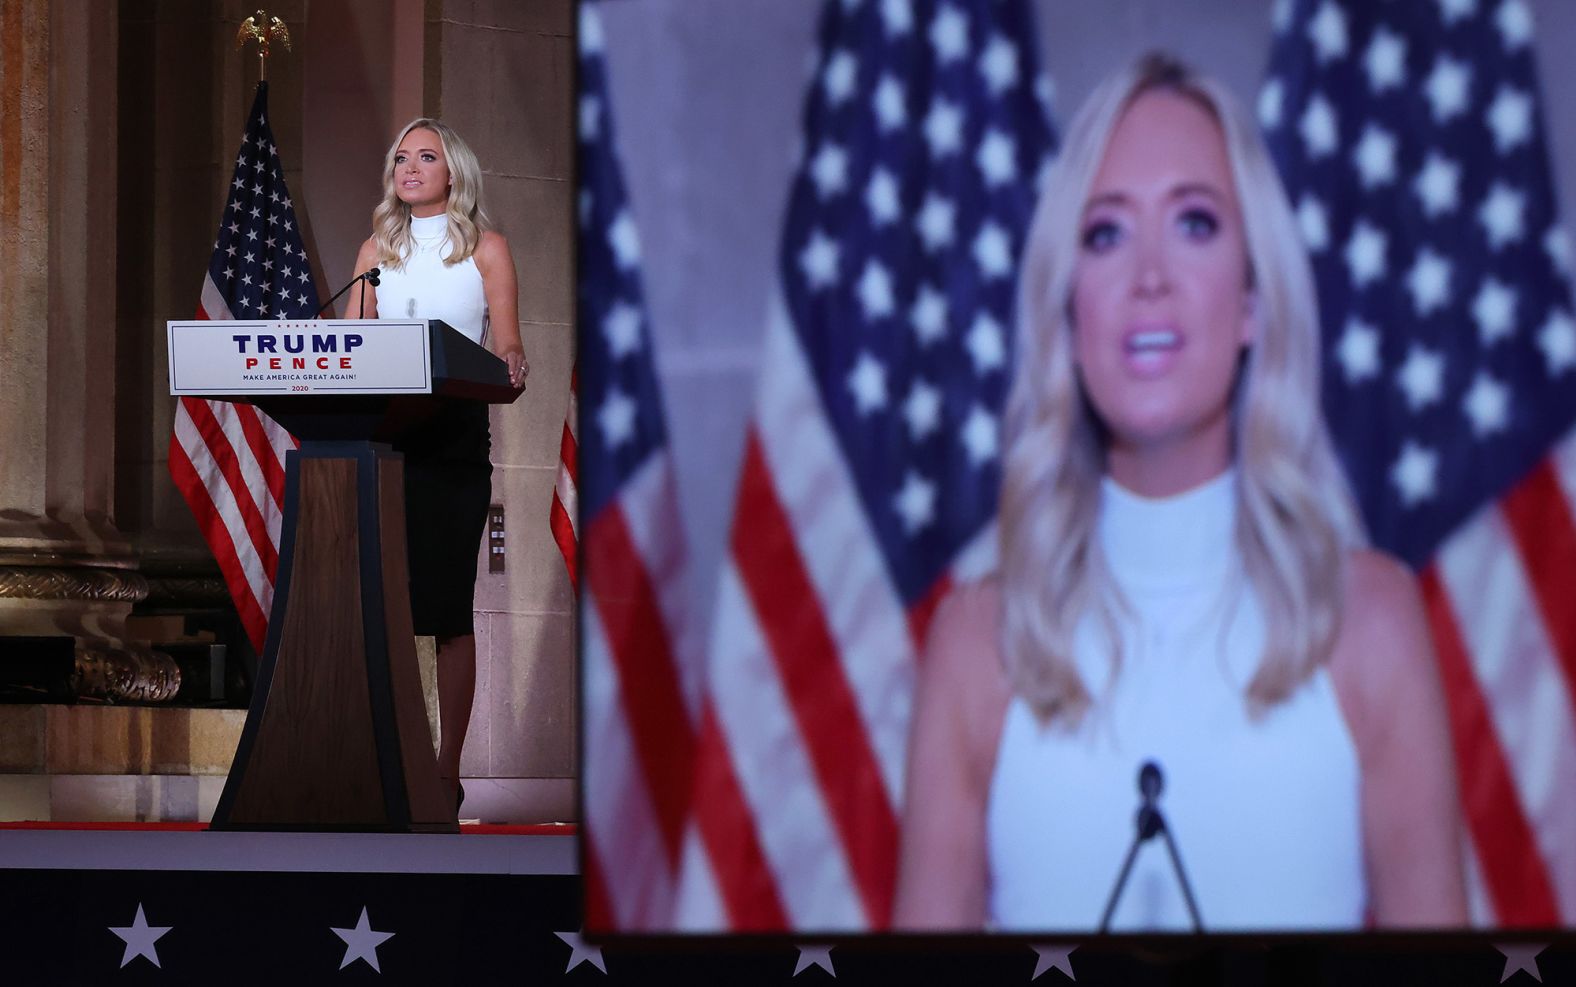 White House press secretary Kayleigh McEnany <a href="index.php?page=&url=https%3A%2F%2Fwww.cnn.com%2Fpolitics%2Flive-news%2Frnc-2020-day-3%2Fh_97161cc43e159d40da69a16dccd0b3d9" target="_blank">shared her personal story of undergoing a preventative mastectomy</a> as a testament to how Trump cares about preexisting conditions.